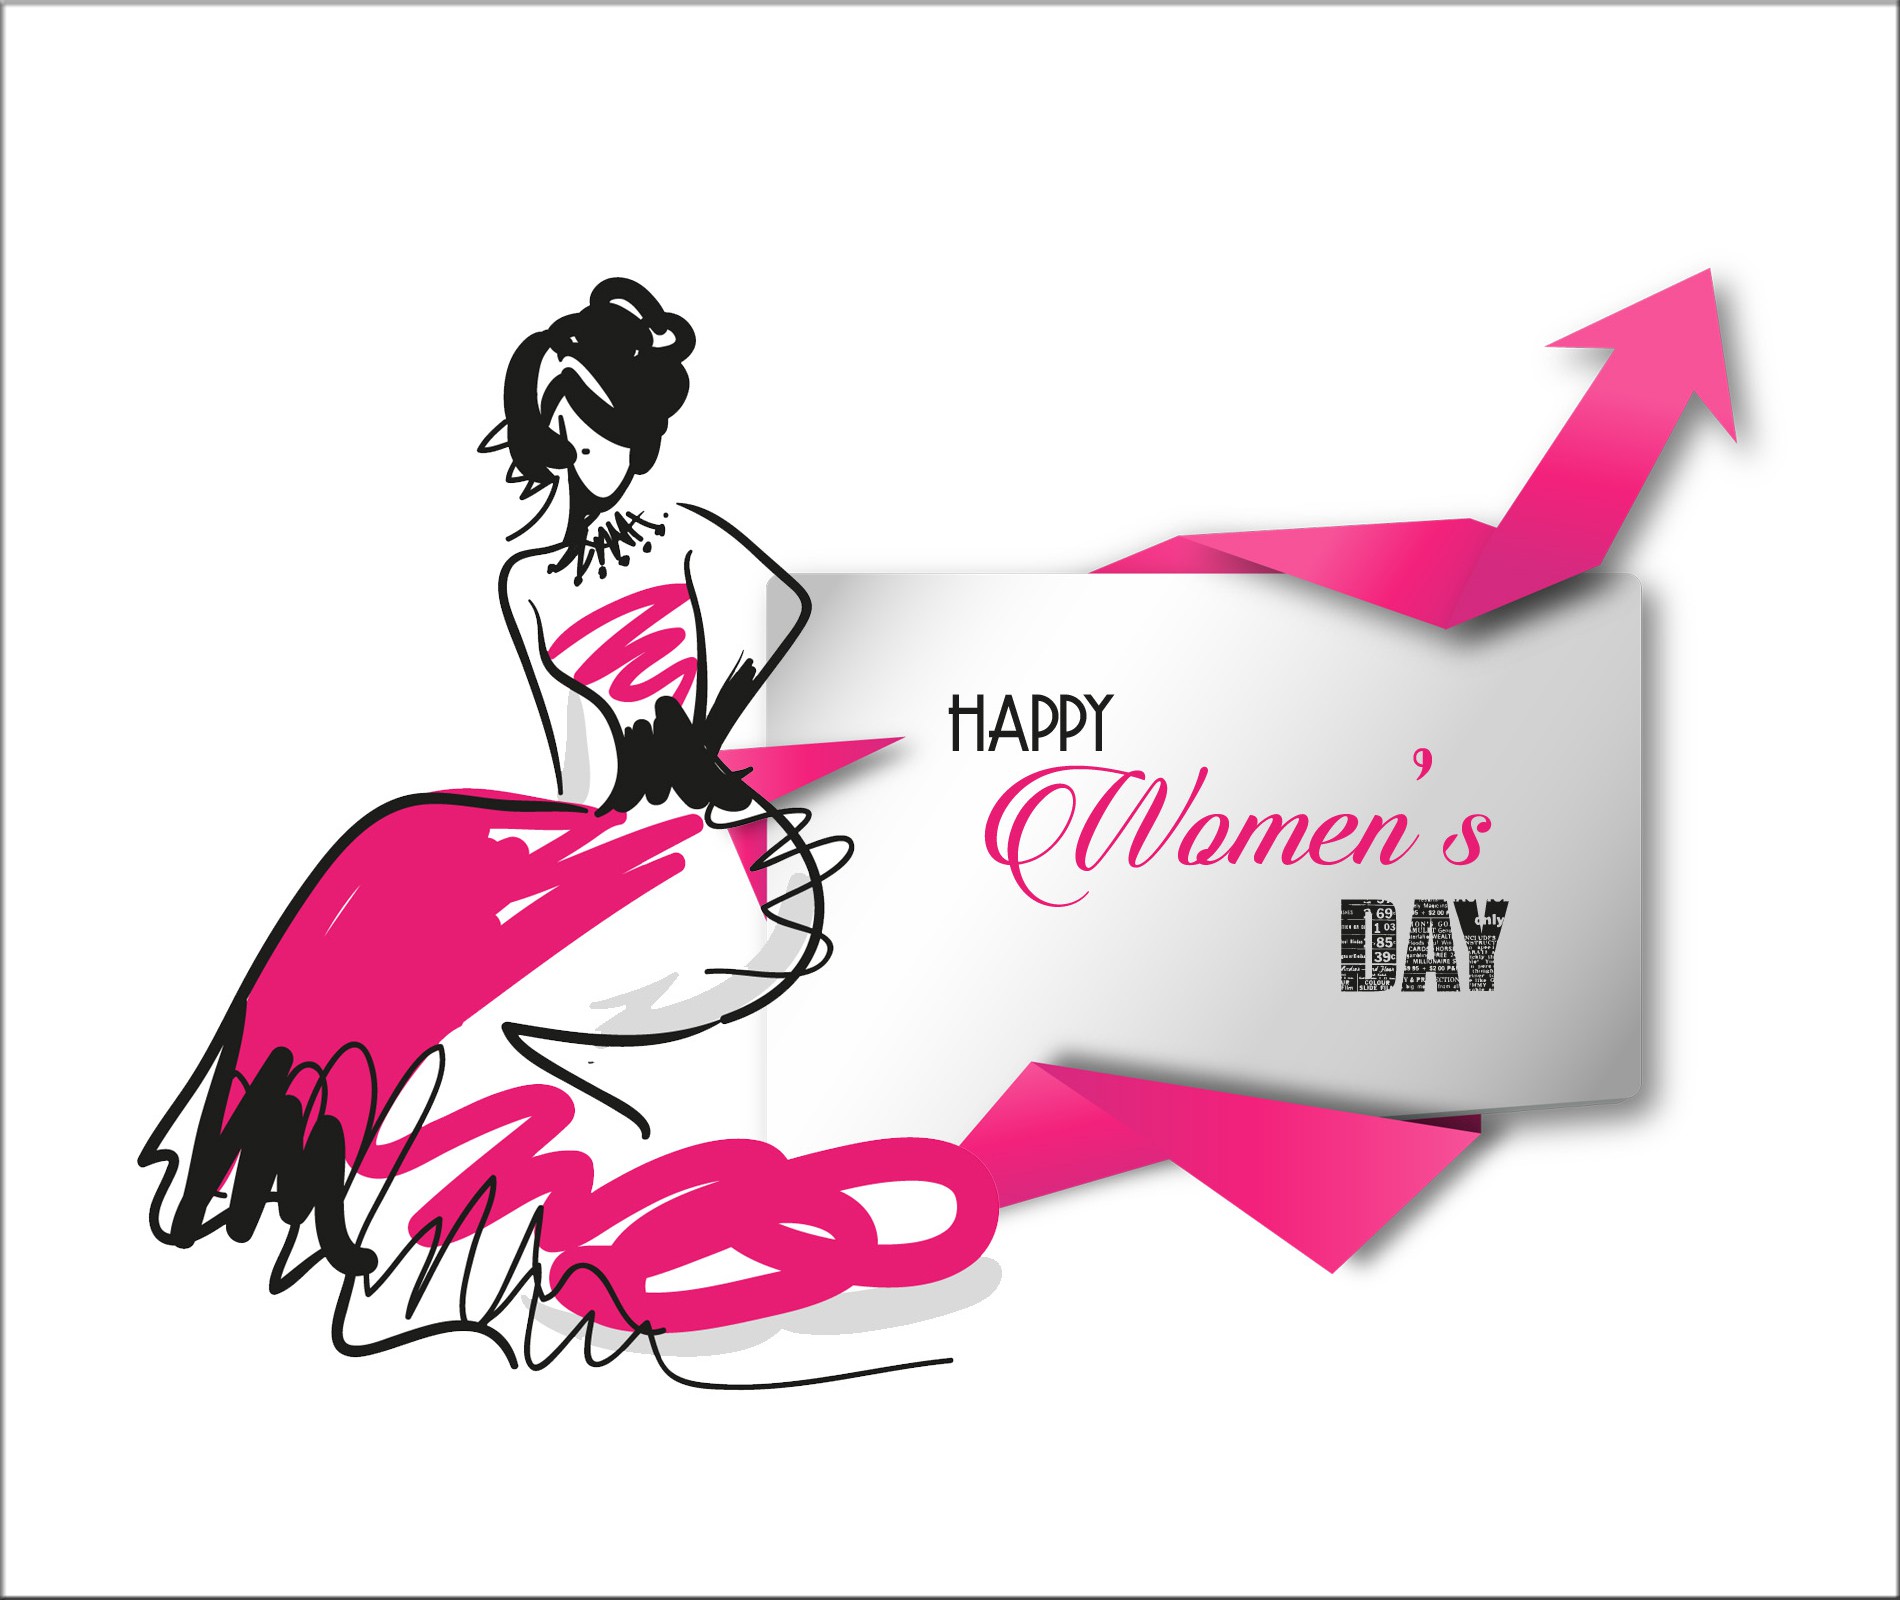 international happy womens day free awesome image for mobile